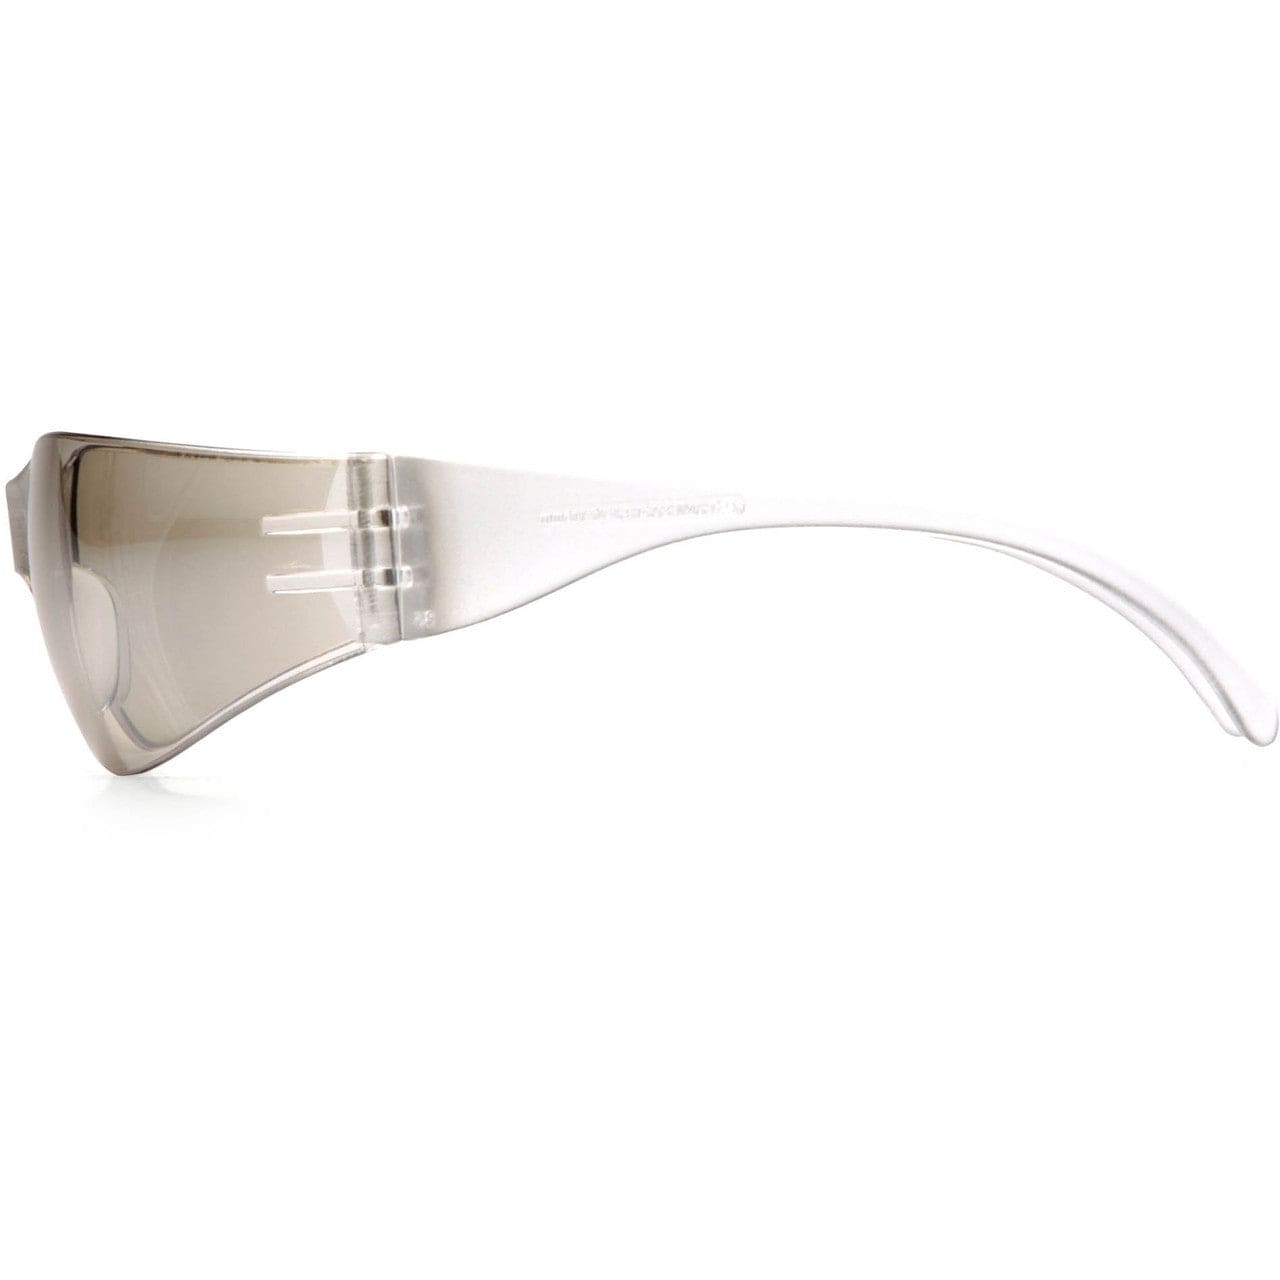 Pyramex Intruder Safety Glasses with Indoor/Outdoor Lens S4180S Side View